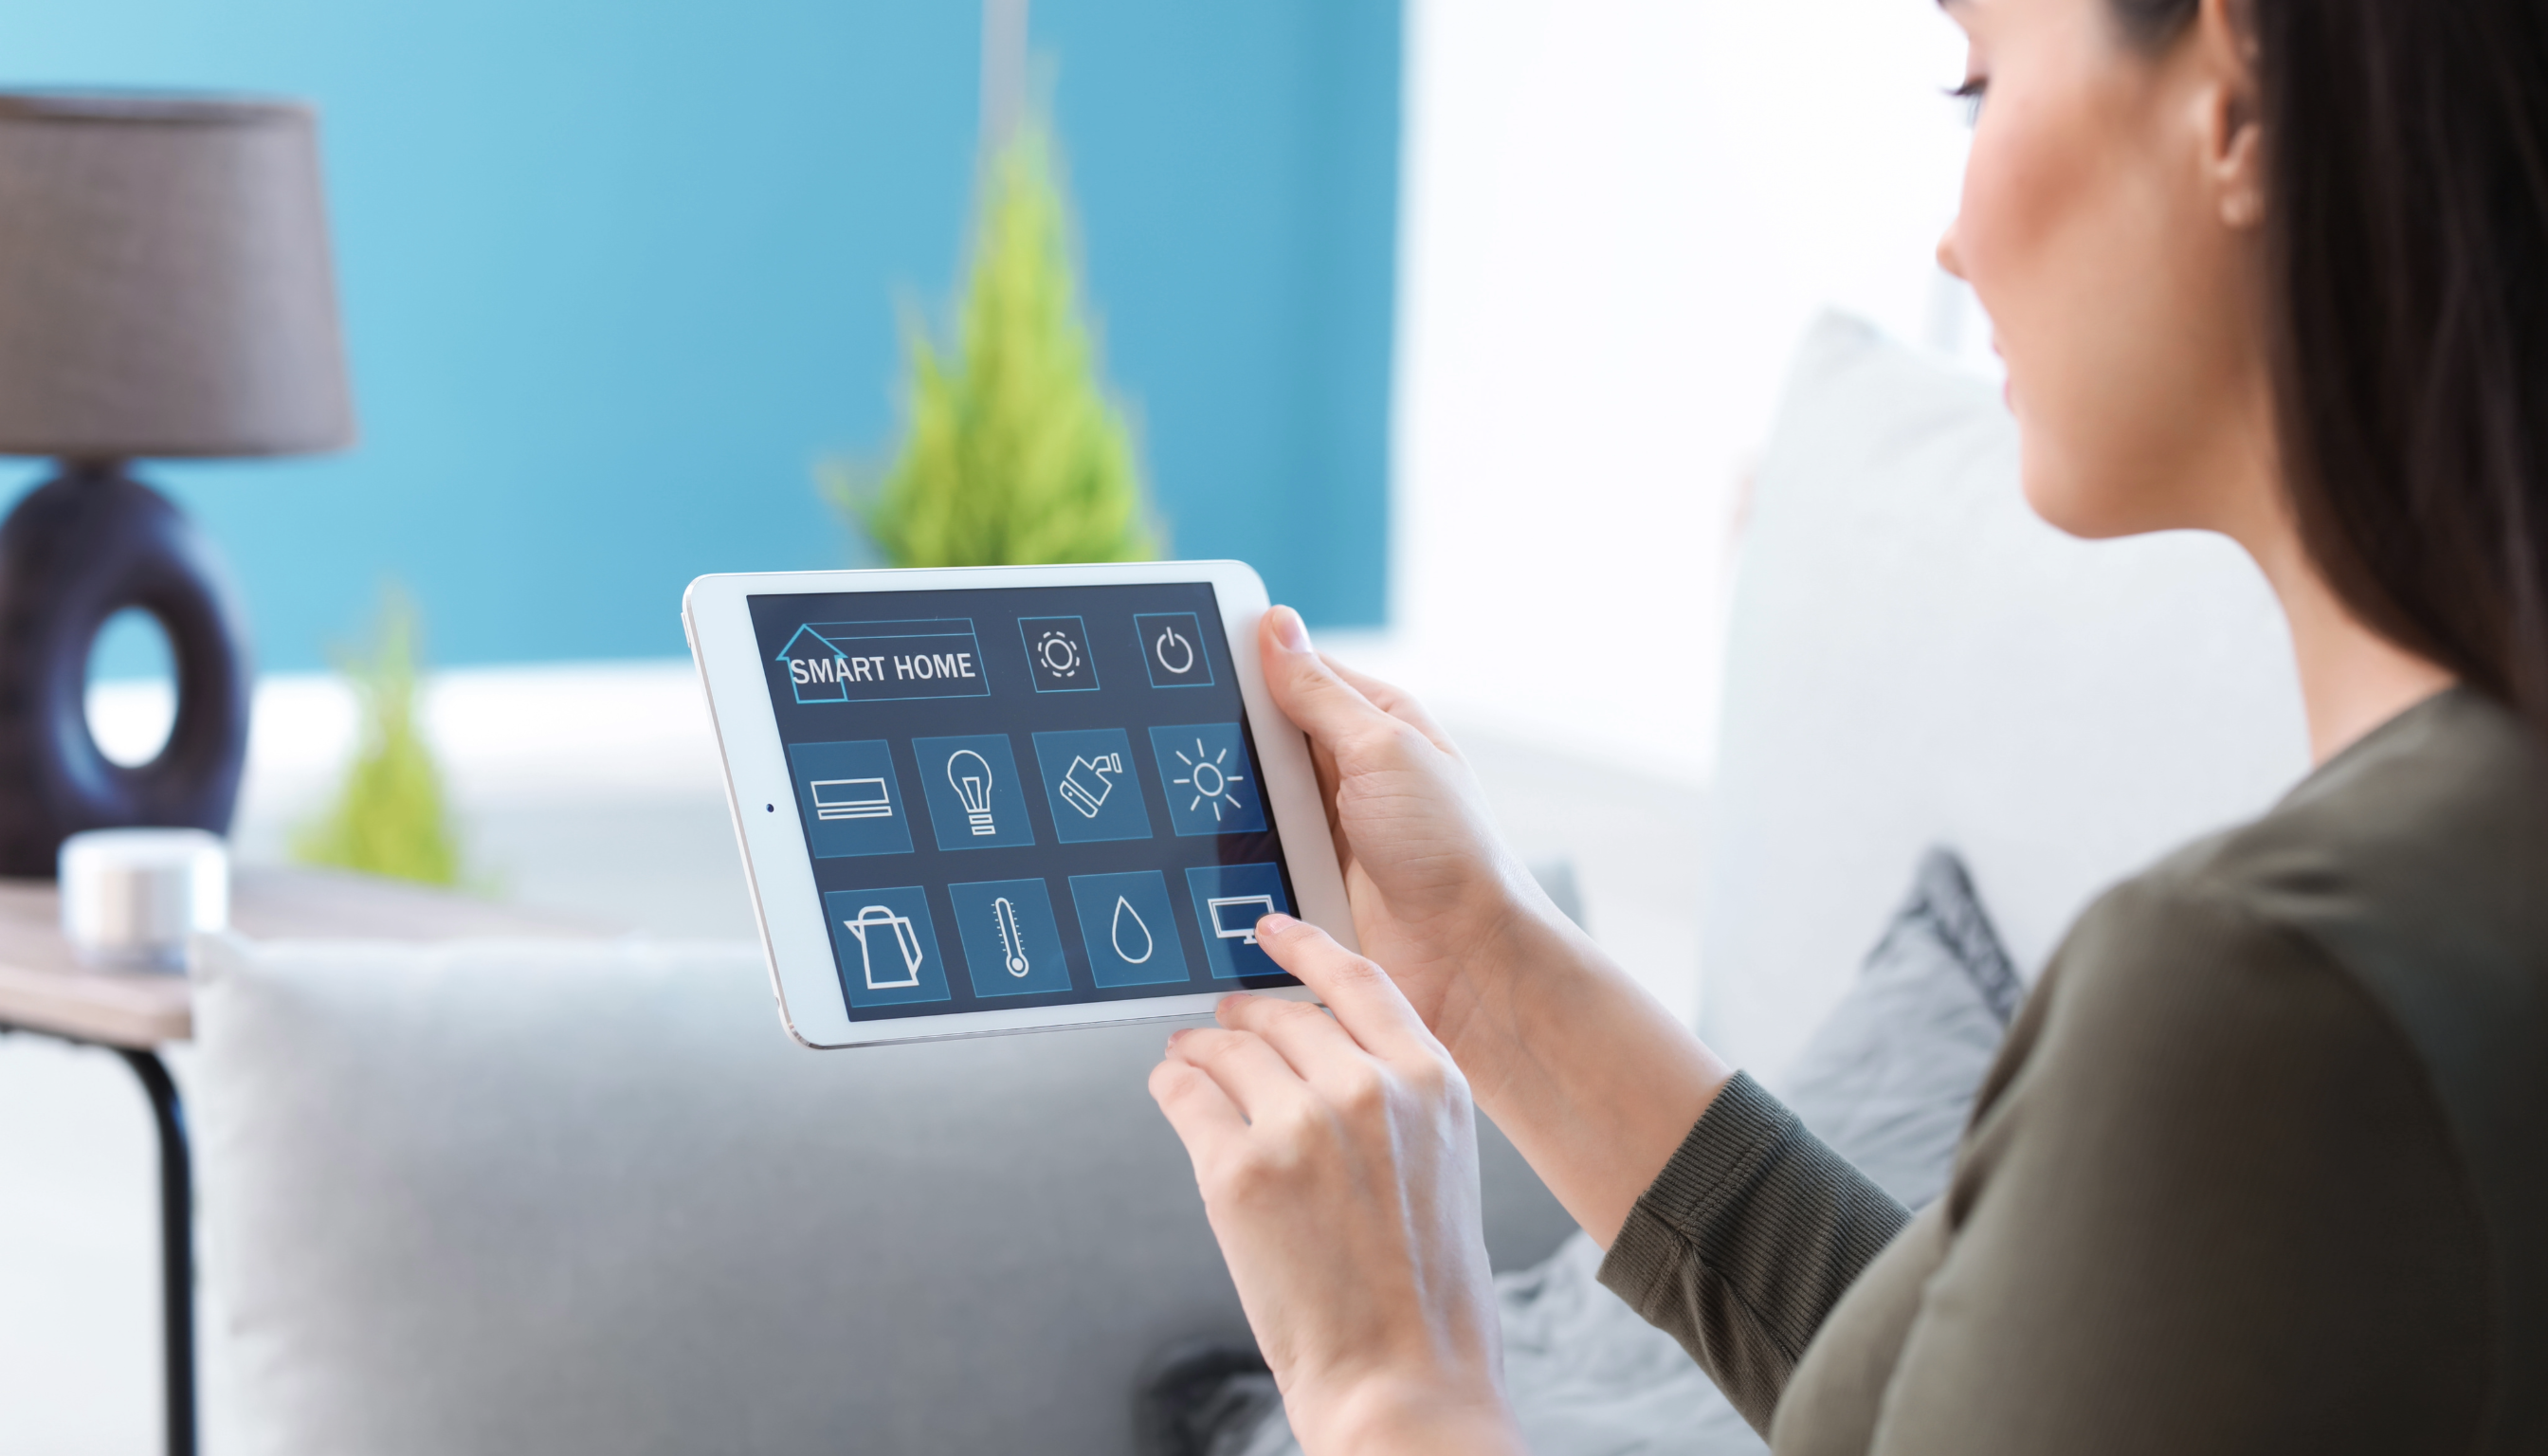 Smart Living: Home Automation for Active Lifestyles